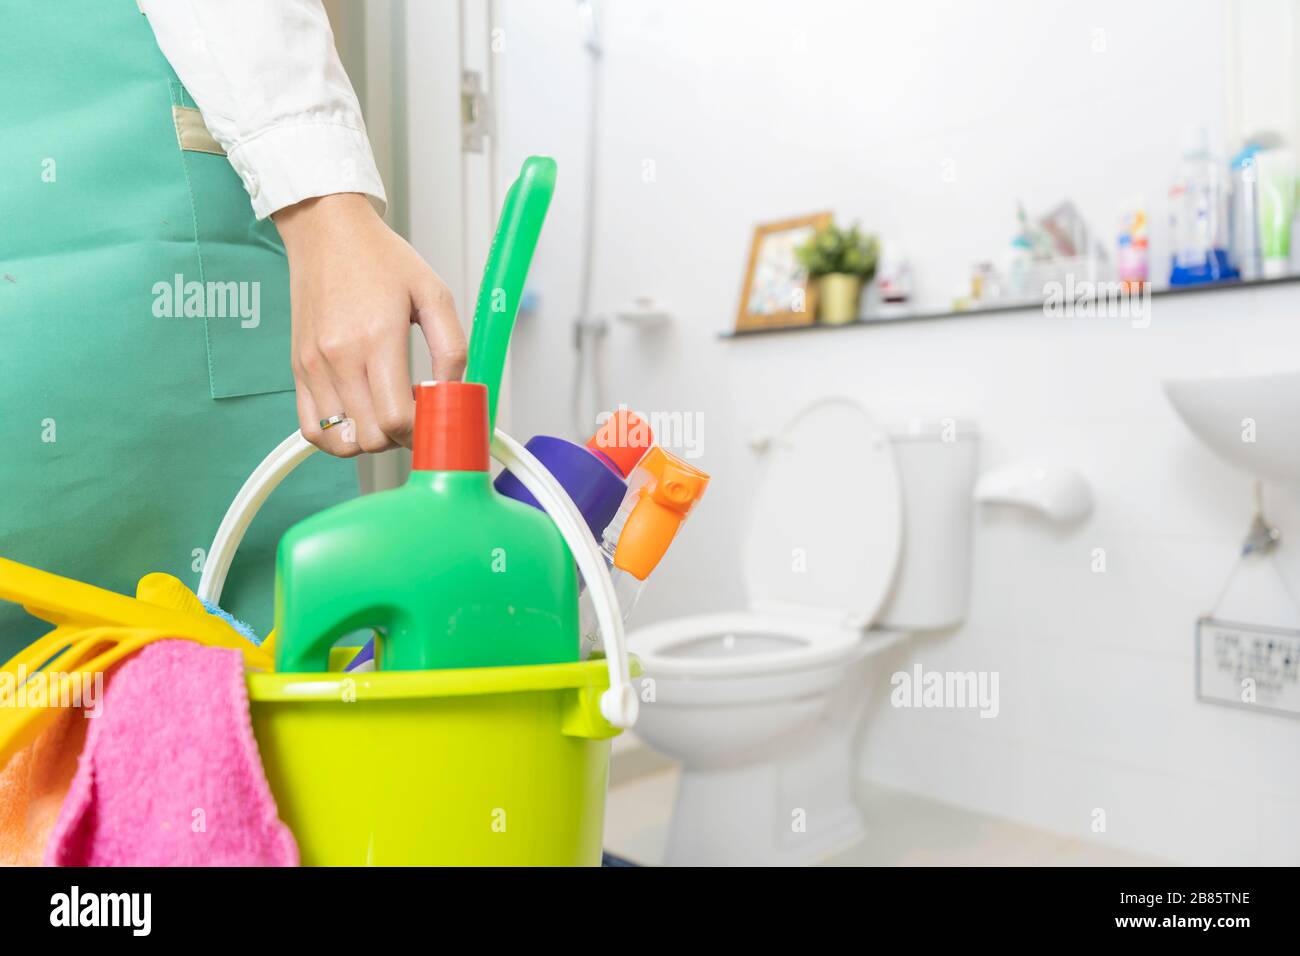 Women carrying a cleaning device to clean the bathroom. The device is put  in the tank ready to be used. Bathroom background, toilet Cleanliness is  imp Stock Photo - Alamy